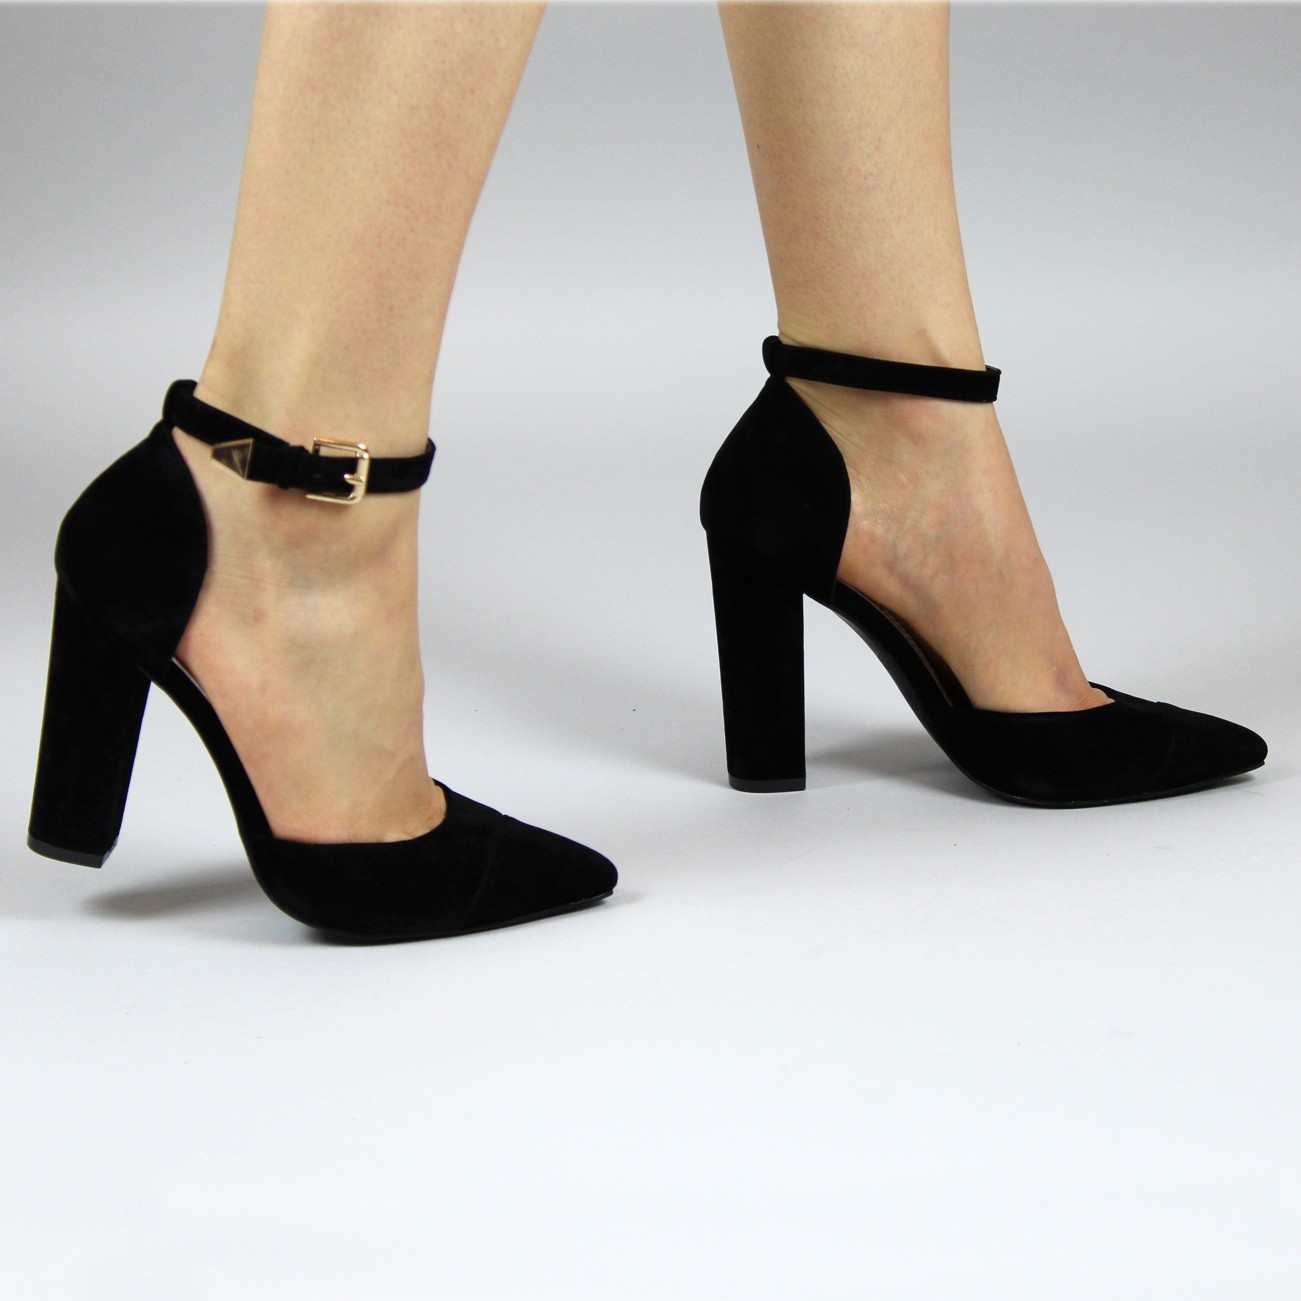 ankle strap shoes sofia black suede block heel ankle strap pointed court shoes HASICGN